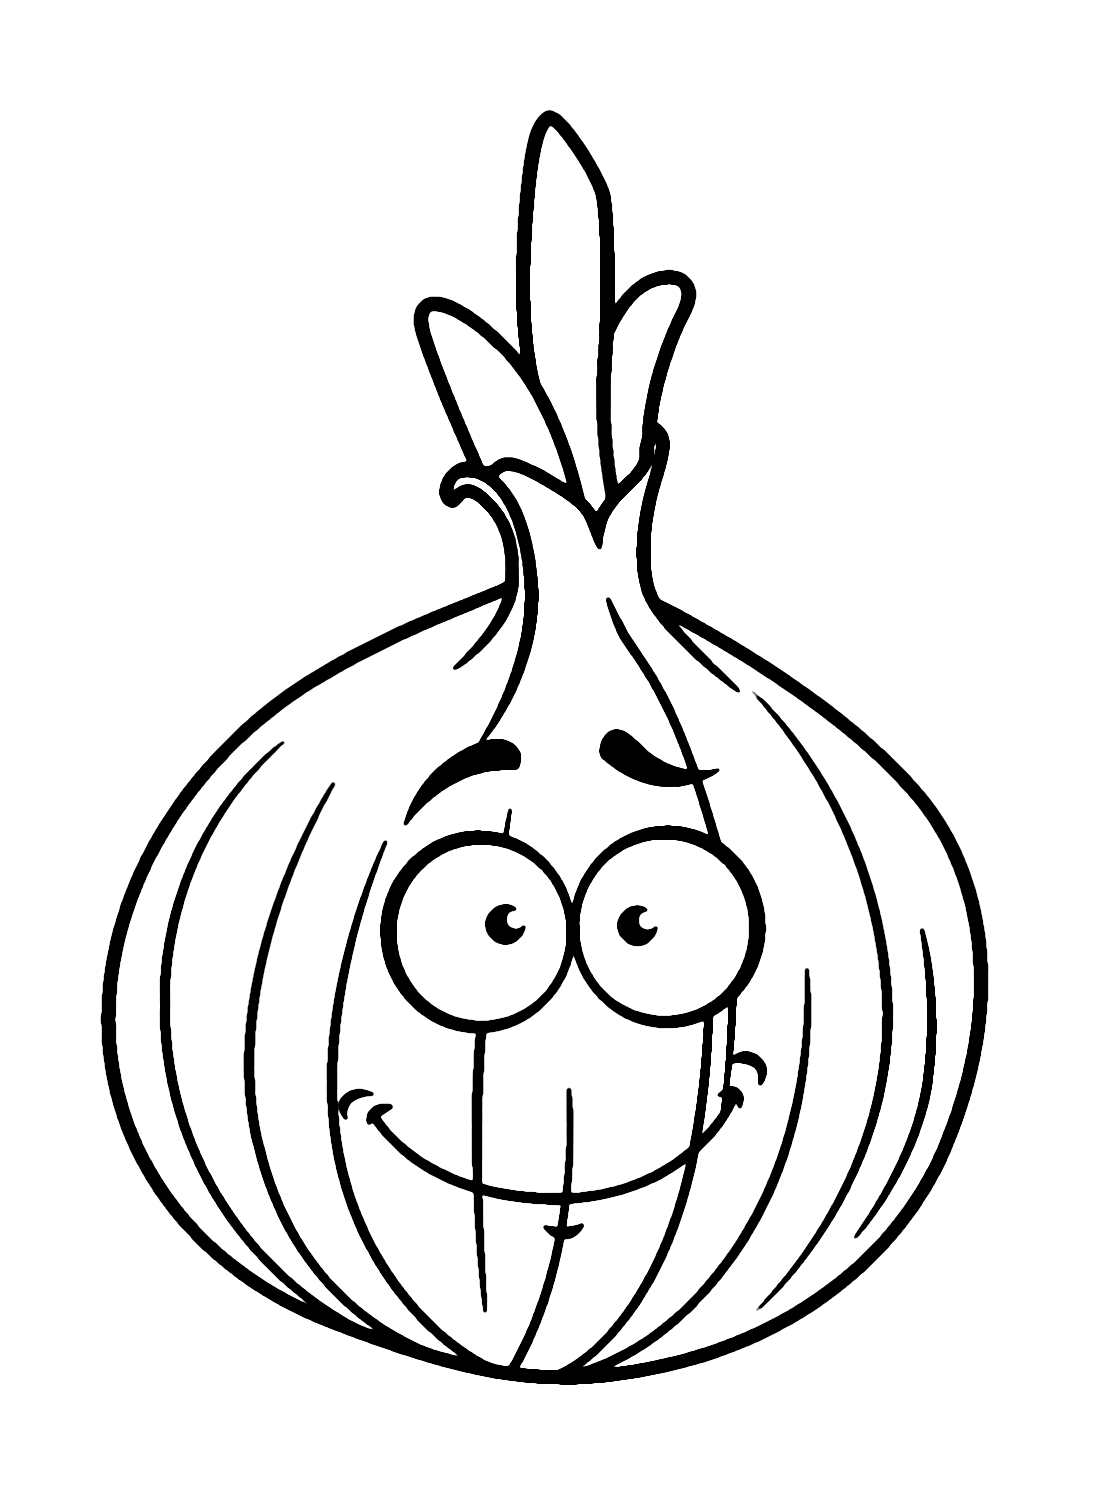 Cartoon Onion Coloring Page